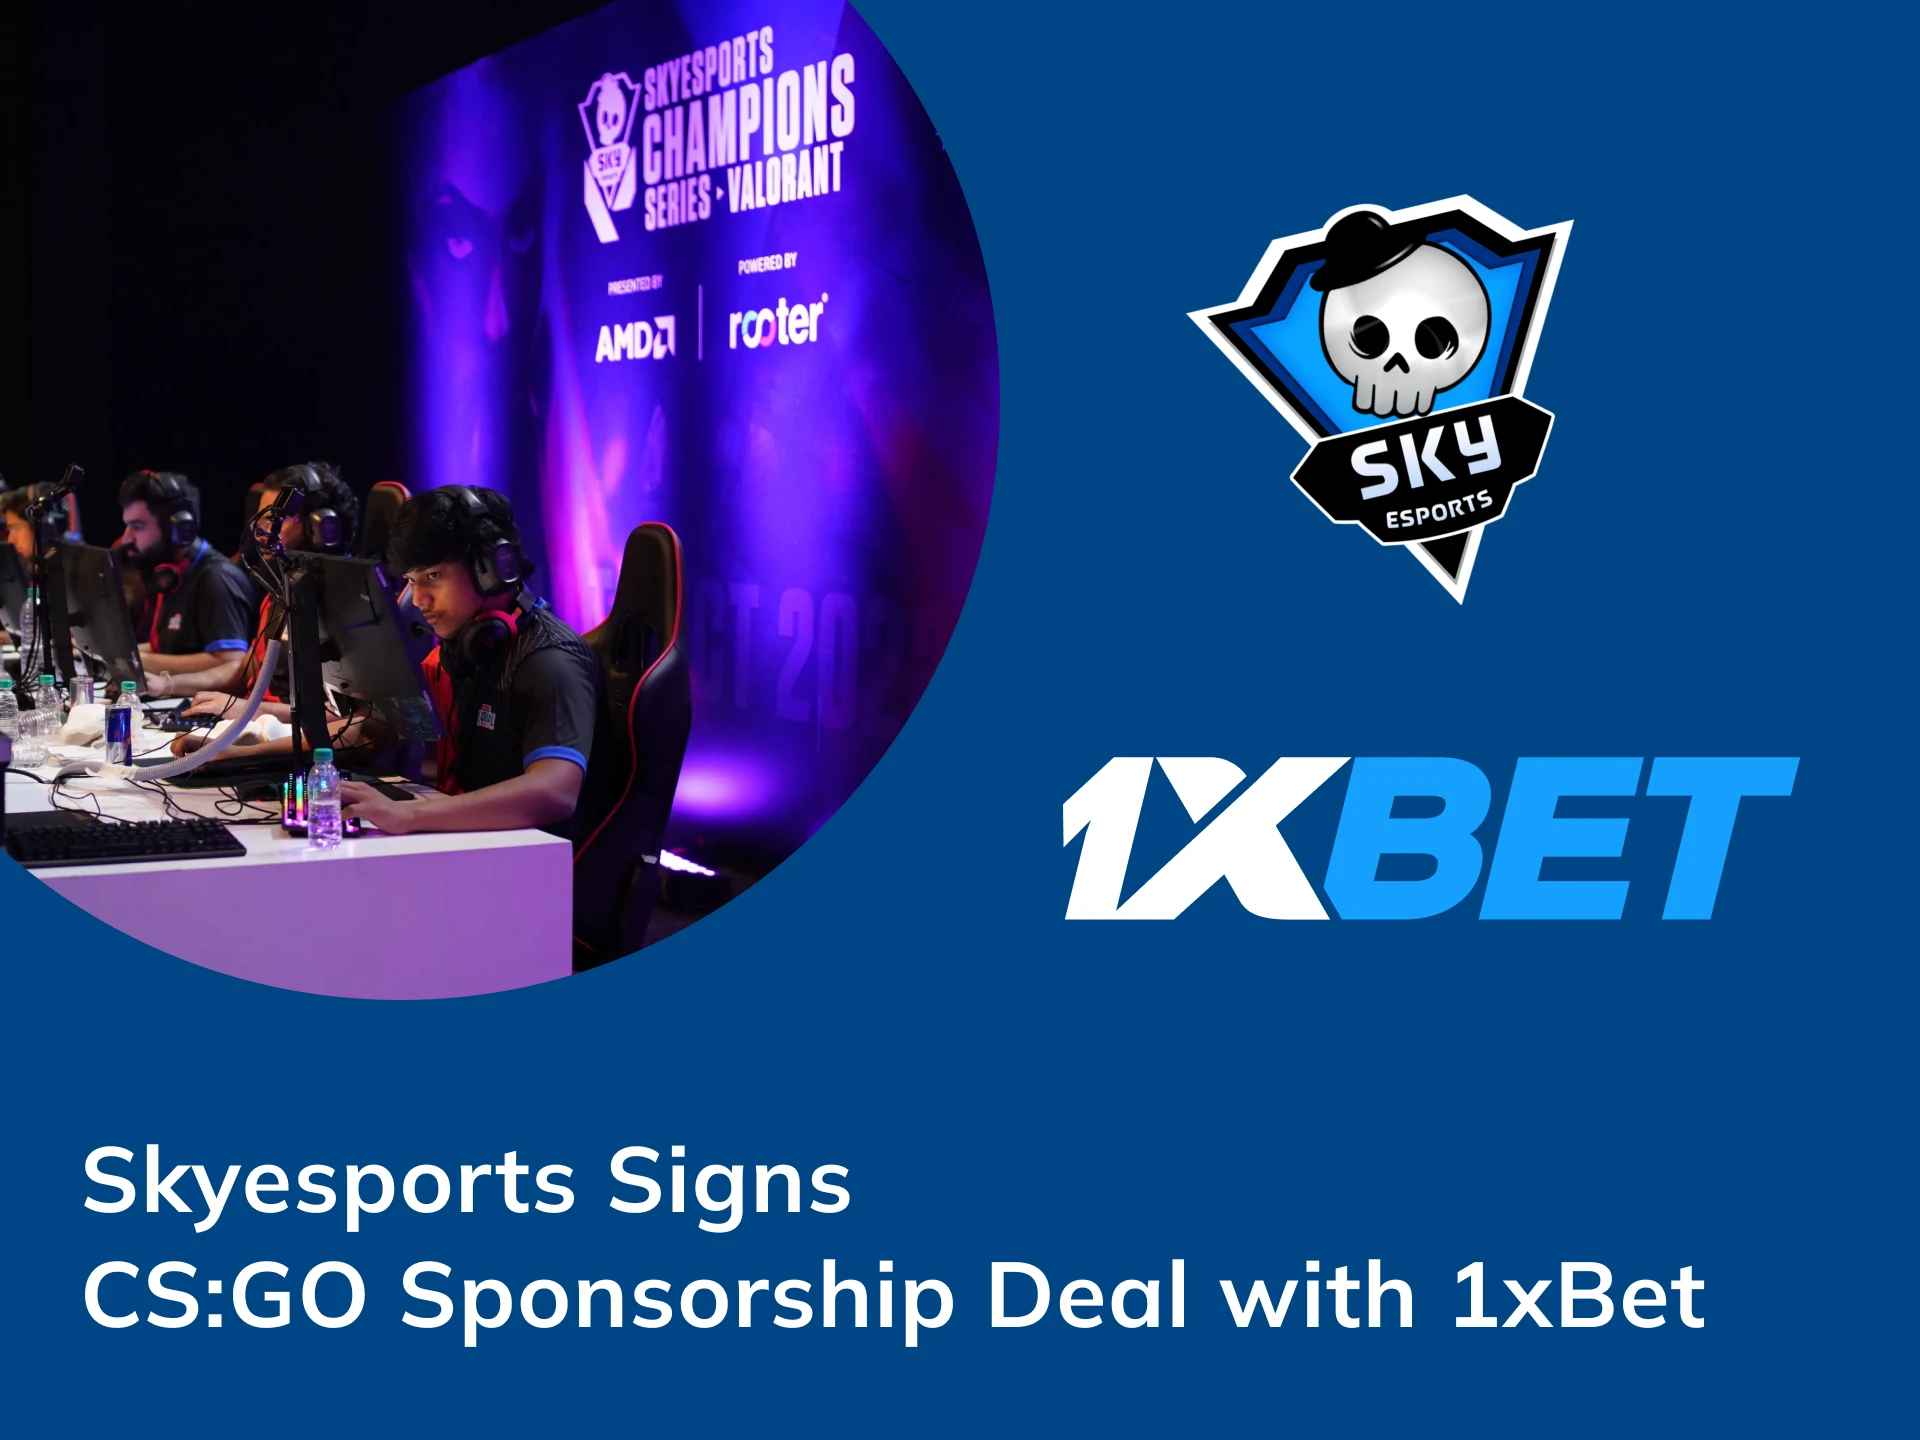 1xBet will be a new partner of esports company Skyesports.